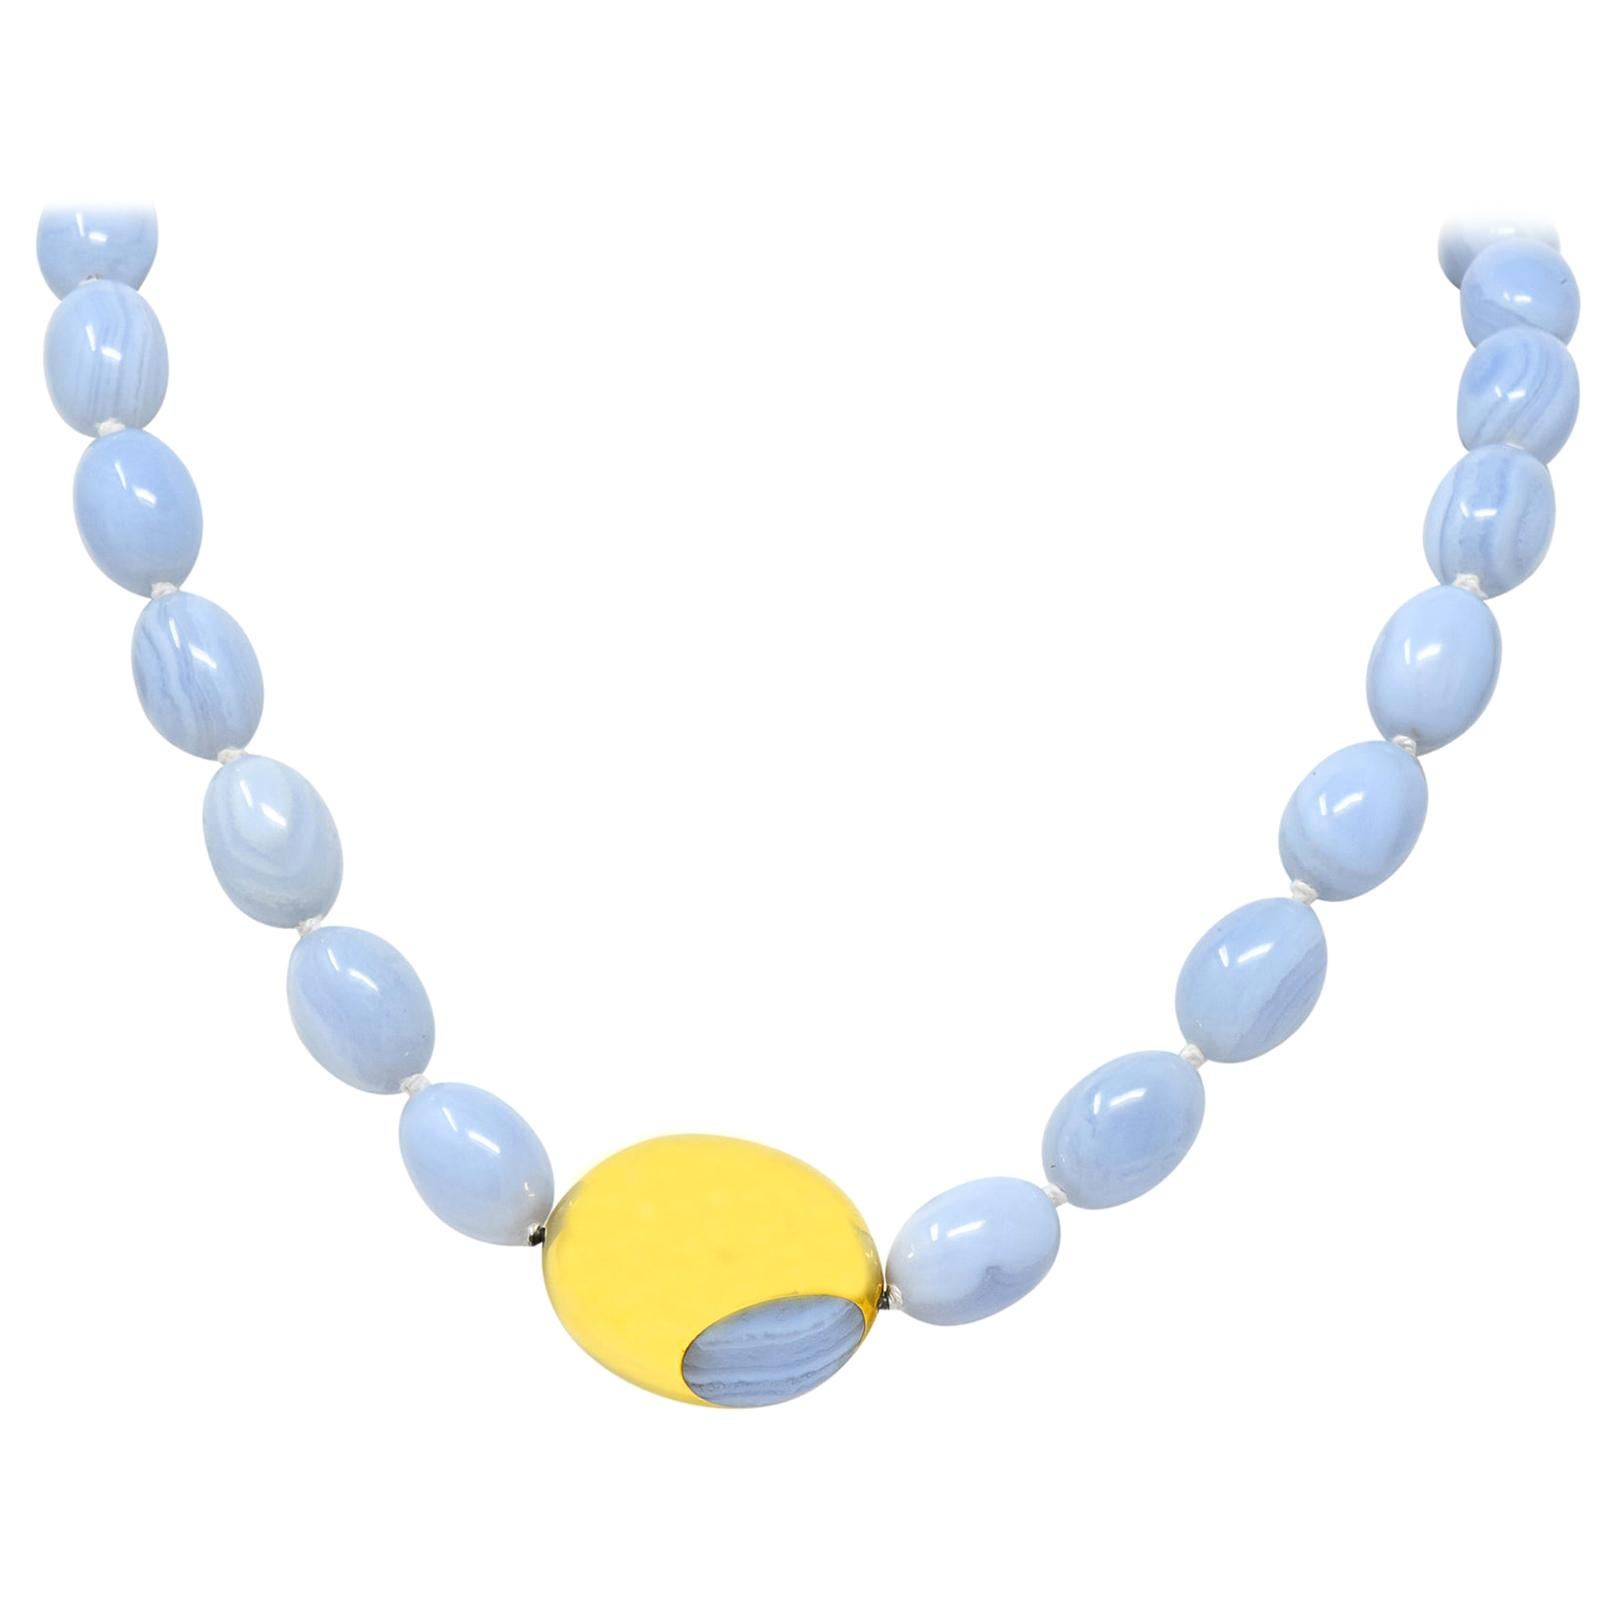 Tiffany & Co. Blue Lace Agate 18 Karat Yellow Gold Bead Necklace